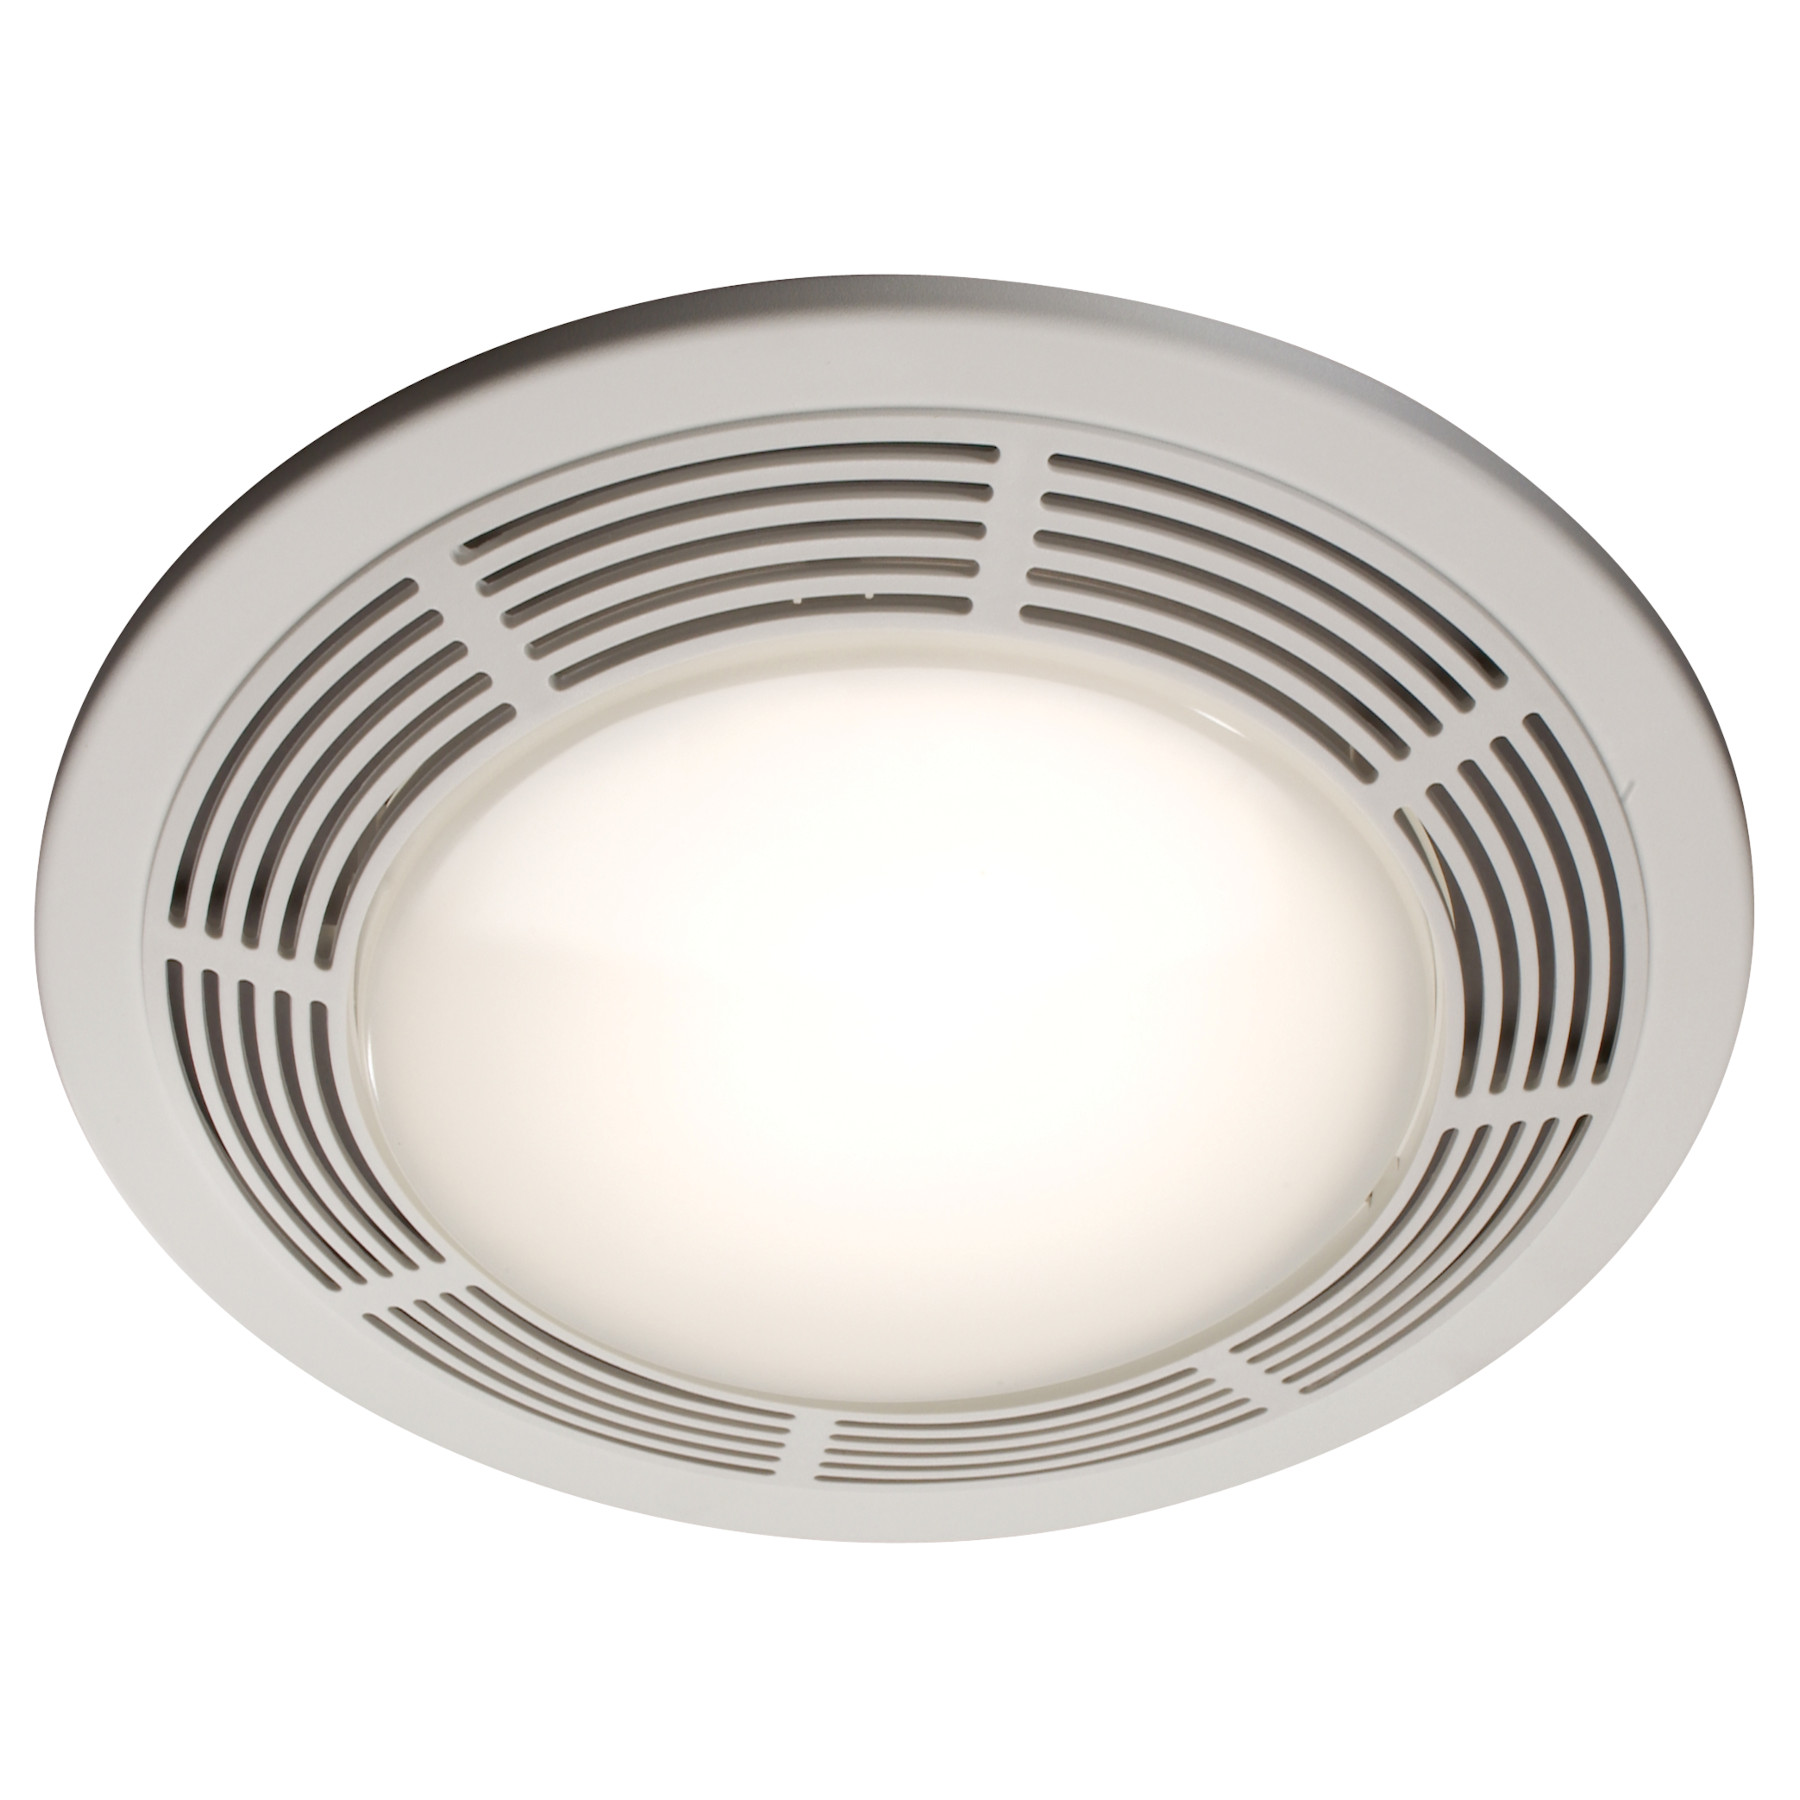 Broan® Ventilation Fan w/ Light and Night Light, Round White Grille with Glass Lens, 100 CFM